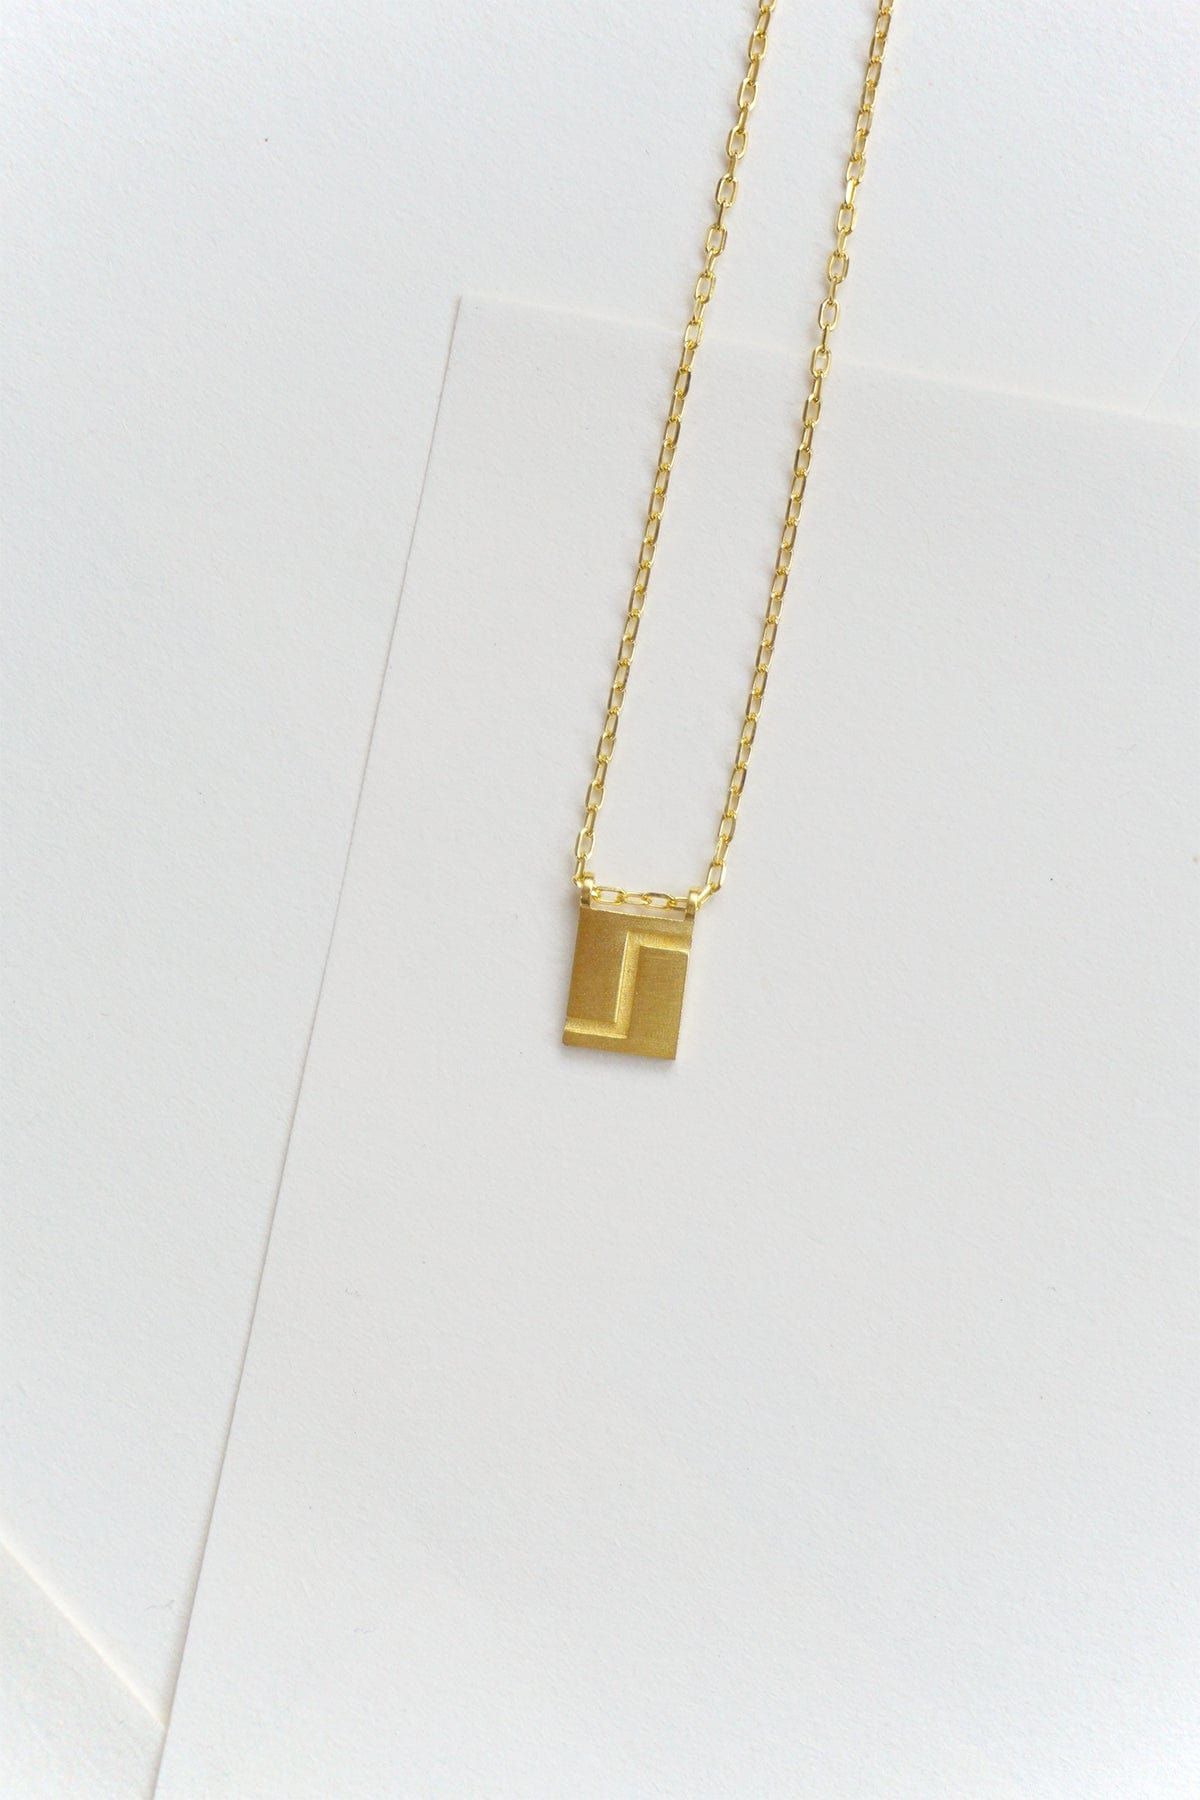 Initial Necklace - Gold Plated Gold / S AR.M ANNA ROSA MOSCHOUTI